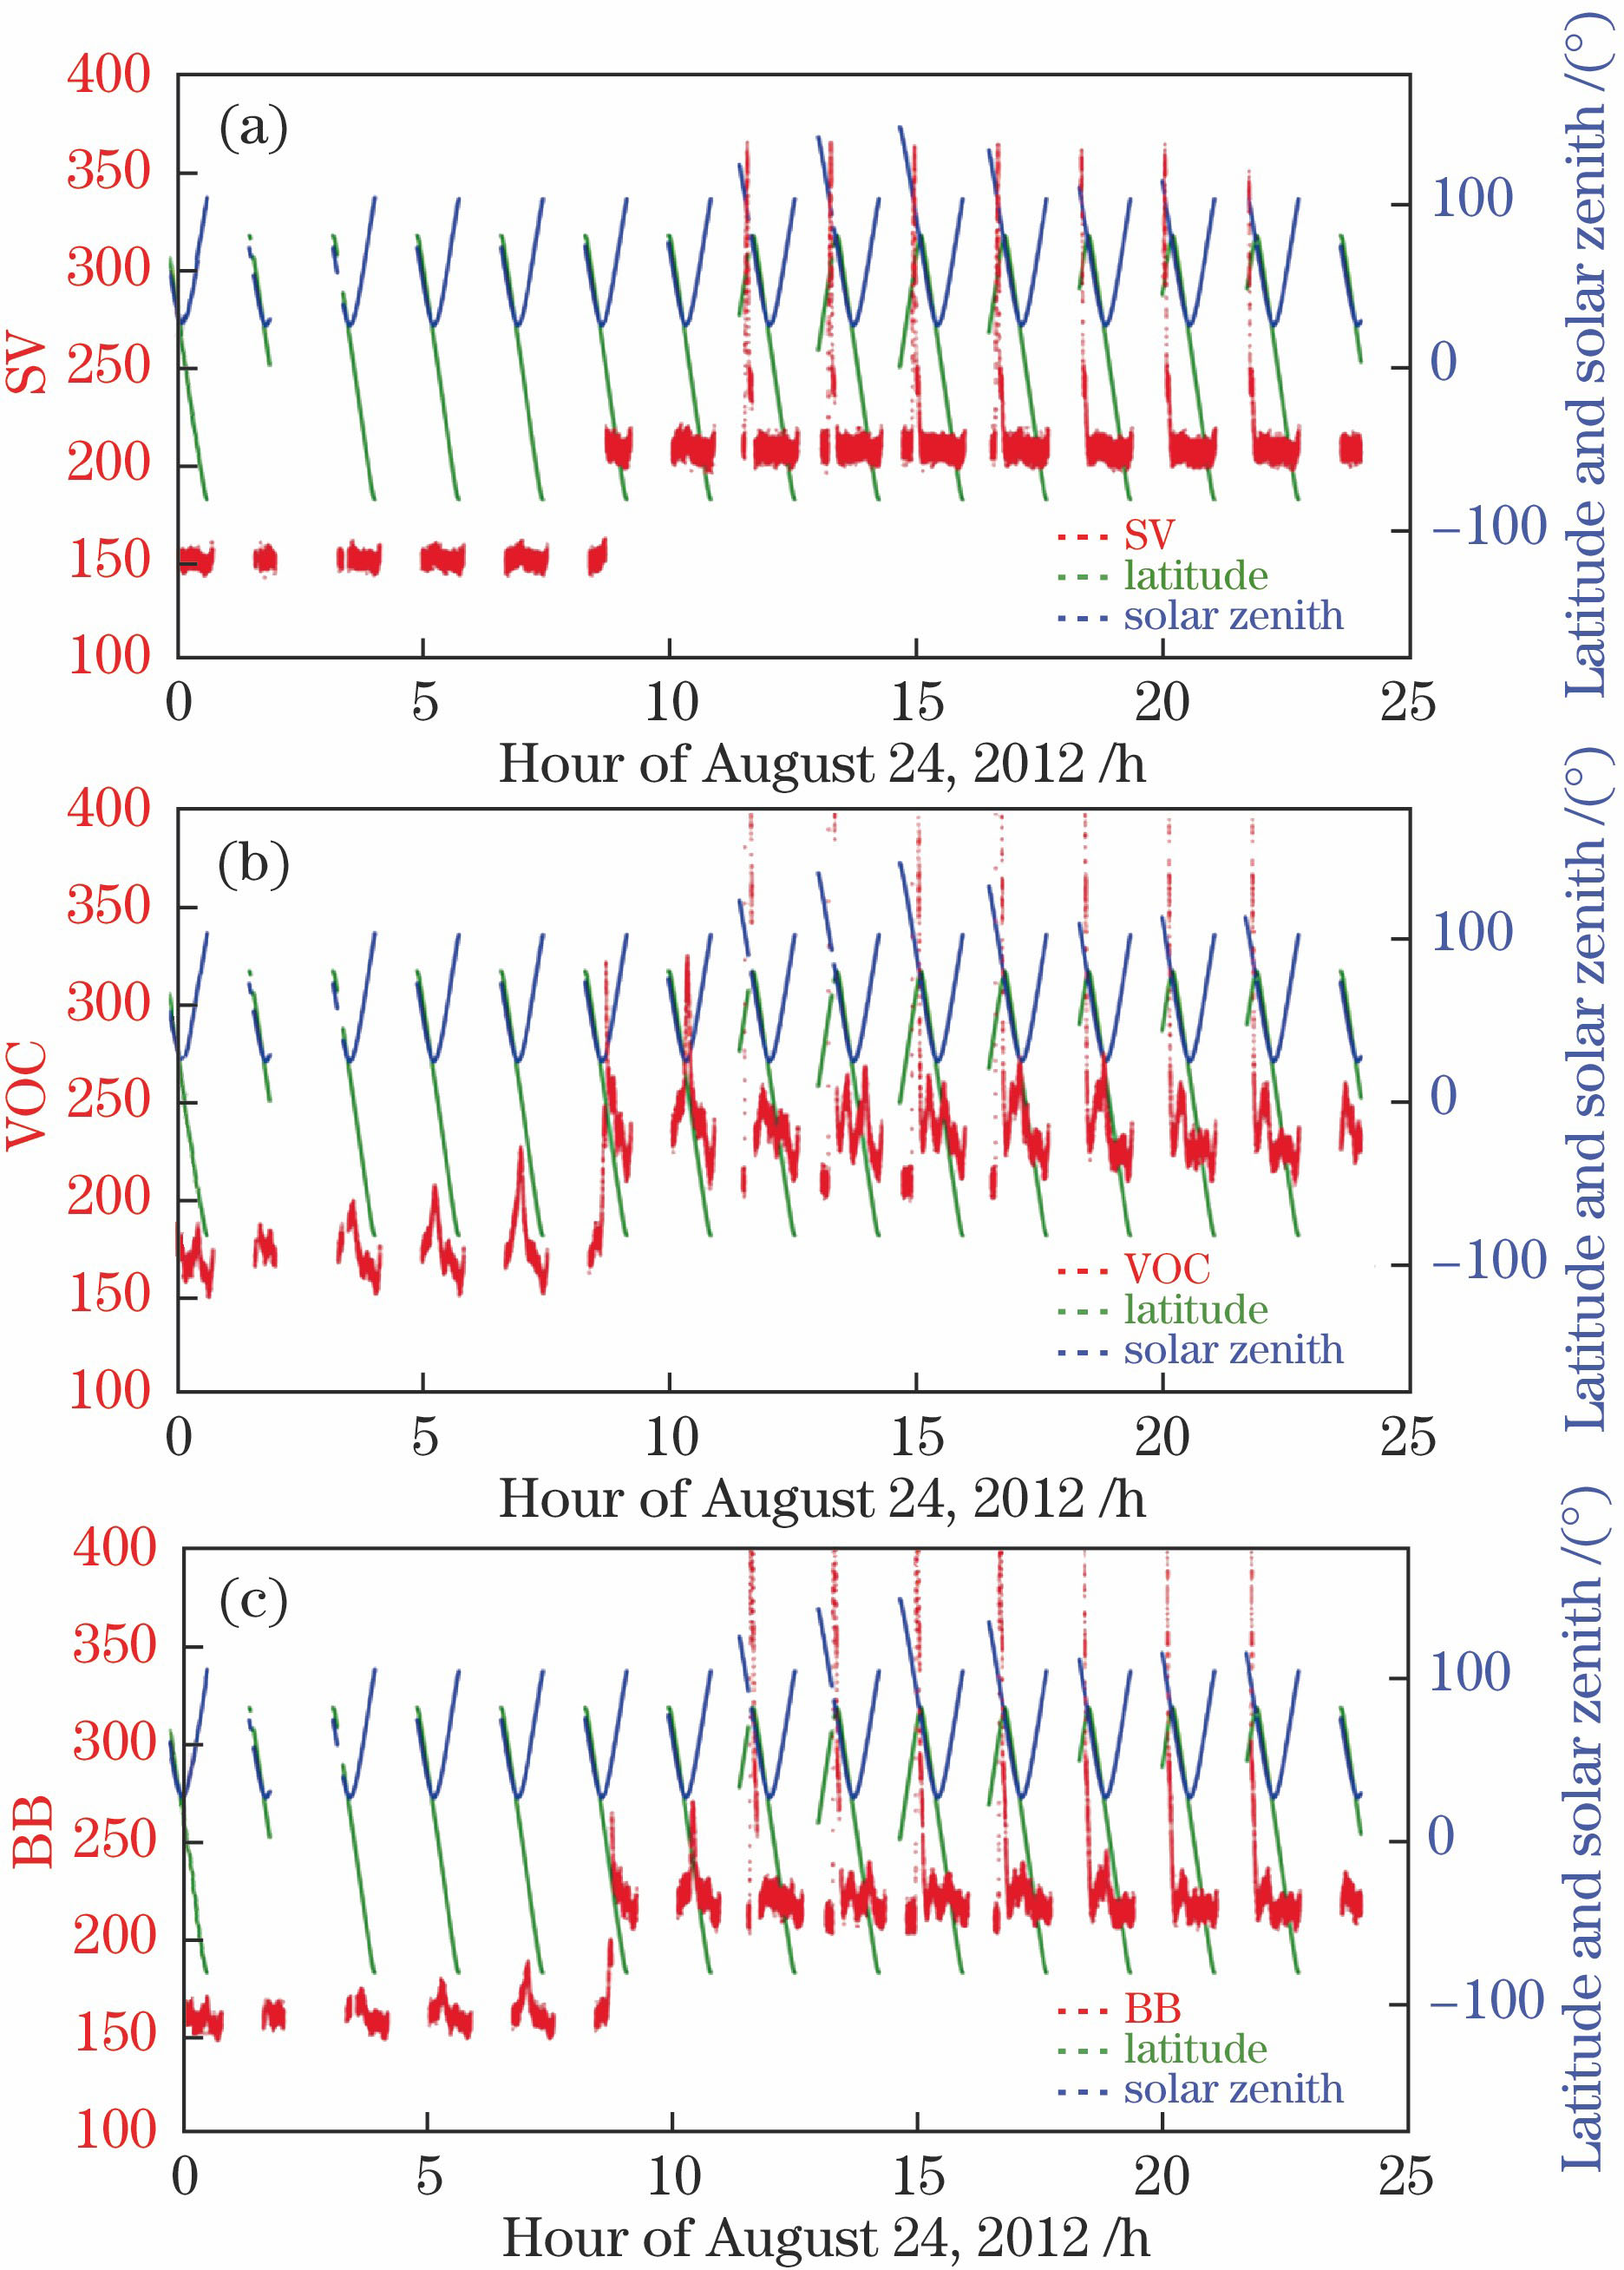 Relation between daily variations of onboard calibration source targets and latitude and solar zenith angle at 2.13 μm. (a) SV; (b) VOC; (c) BB